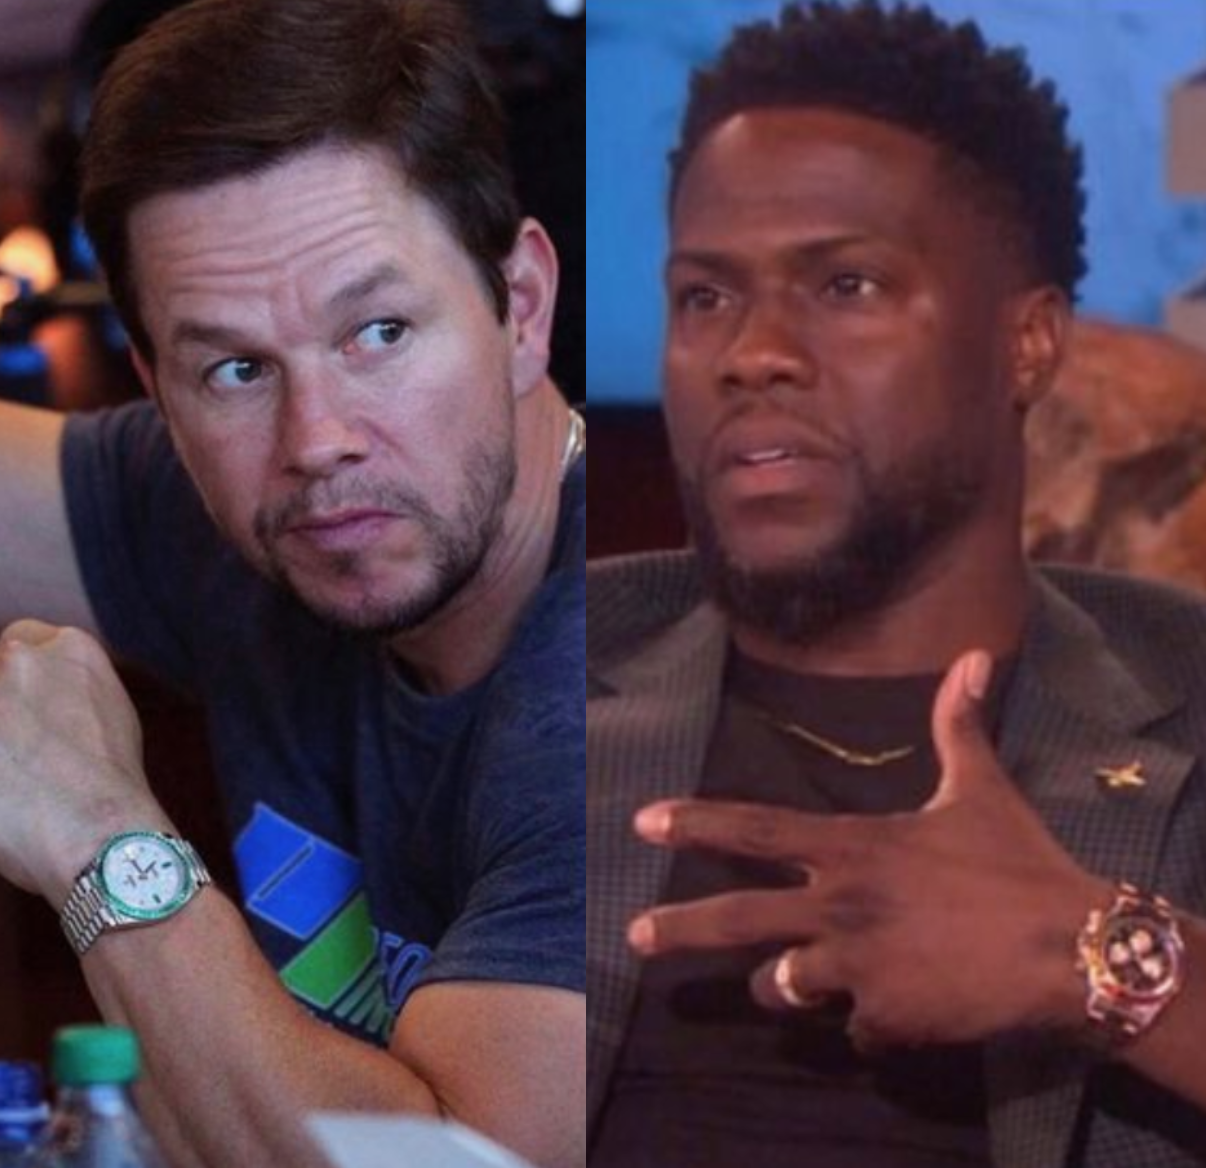 Kevin Hart Mark Wahlberg watch collection Rolex Patek Philippe